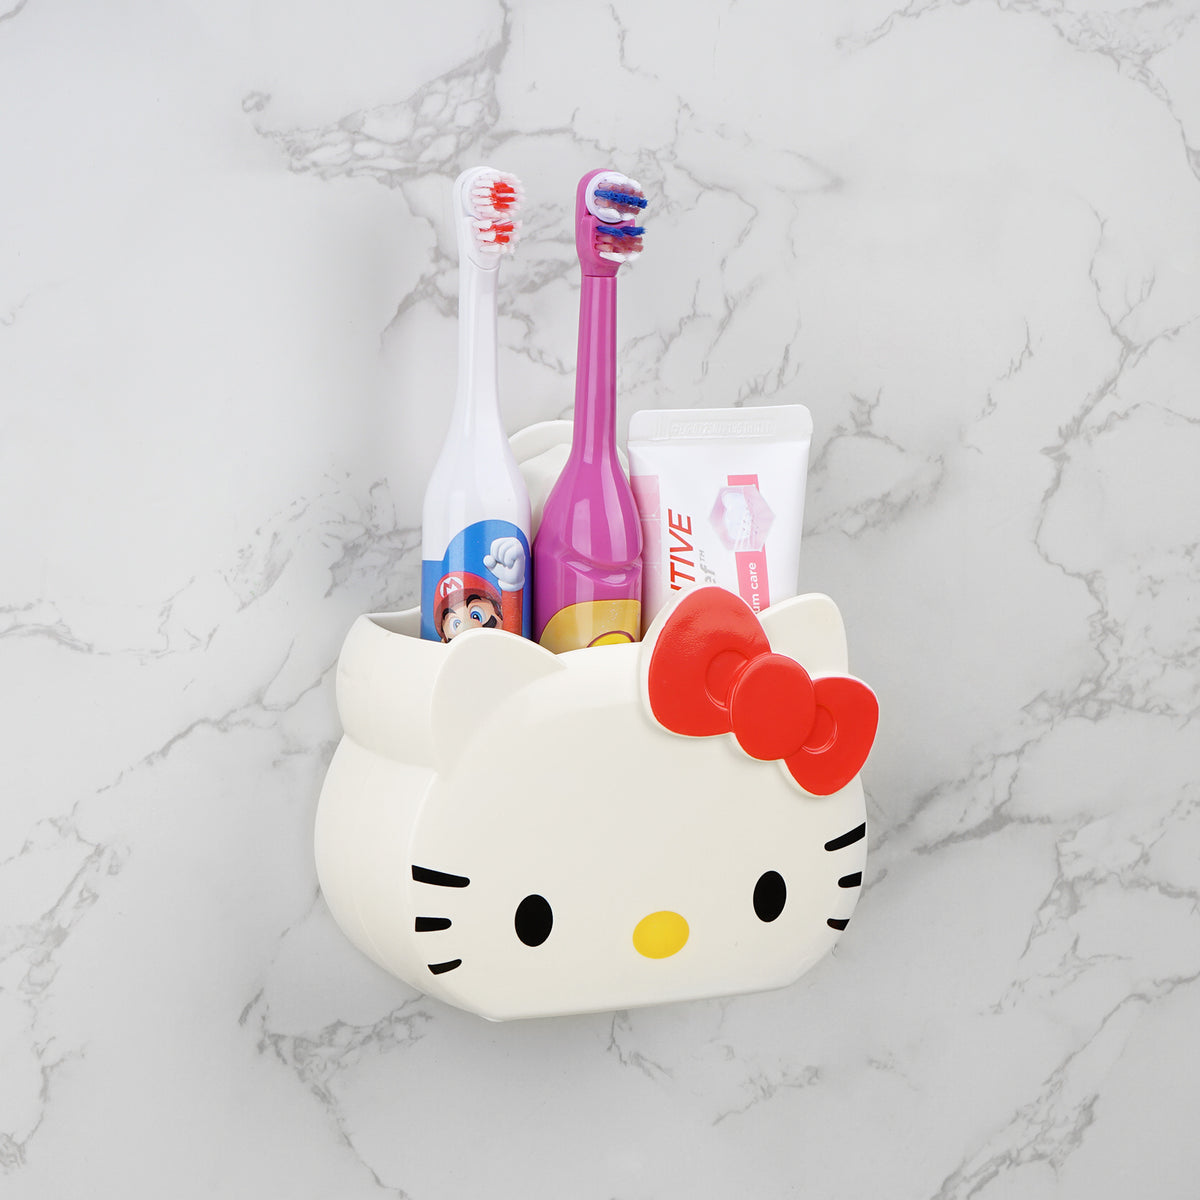 Adorila Wall Mounted Toothbrush Holder for Kids, Self Adhesive Toothbrush Storage Organizer, Hello Kitty Electric Toothbrush Toothpaste Holder for Bathroom (Pink)